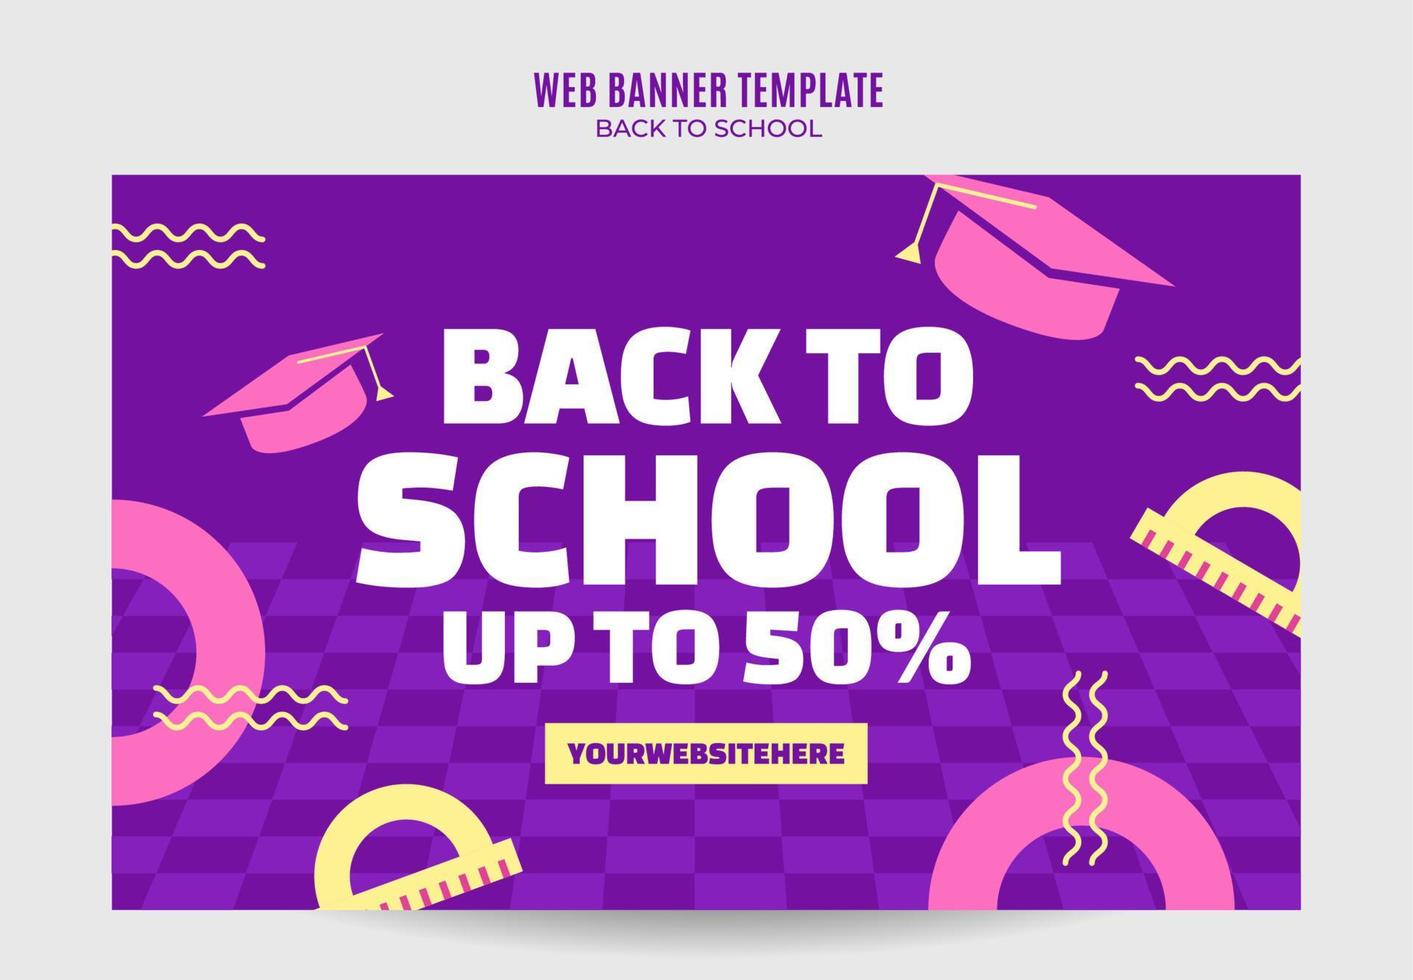 Back to School Web Banner for Social Media Poster, banner, space area and background vector